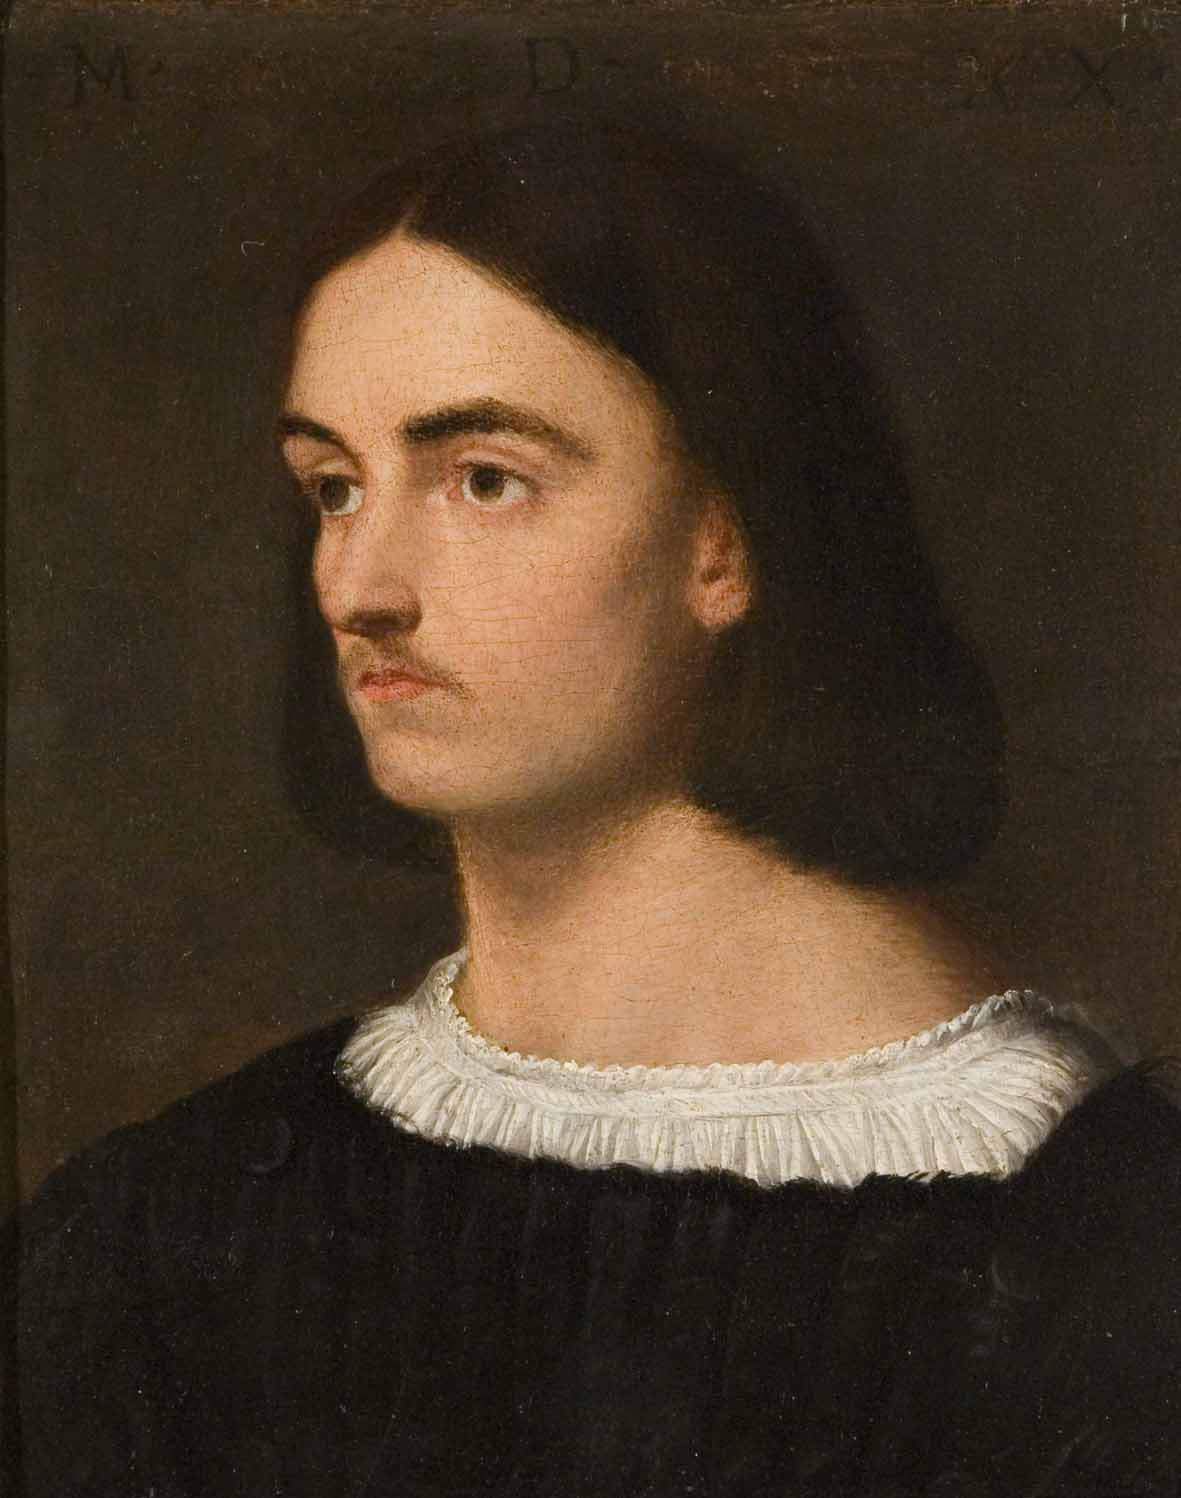 It may indeed be by Giorgione the uncertain portrait that will be on display from October in Castelfranco